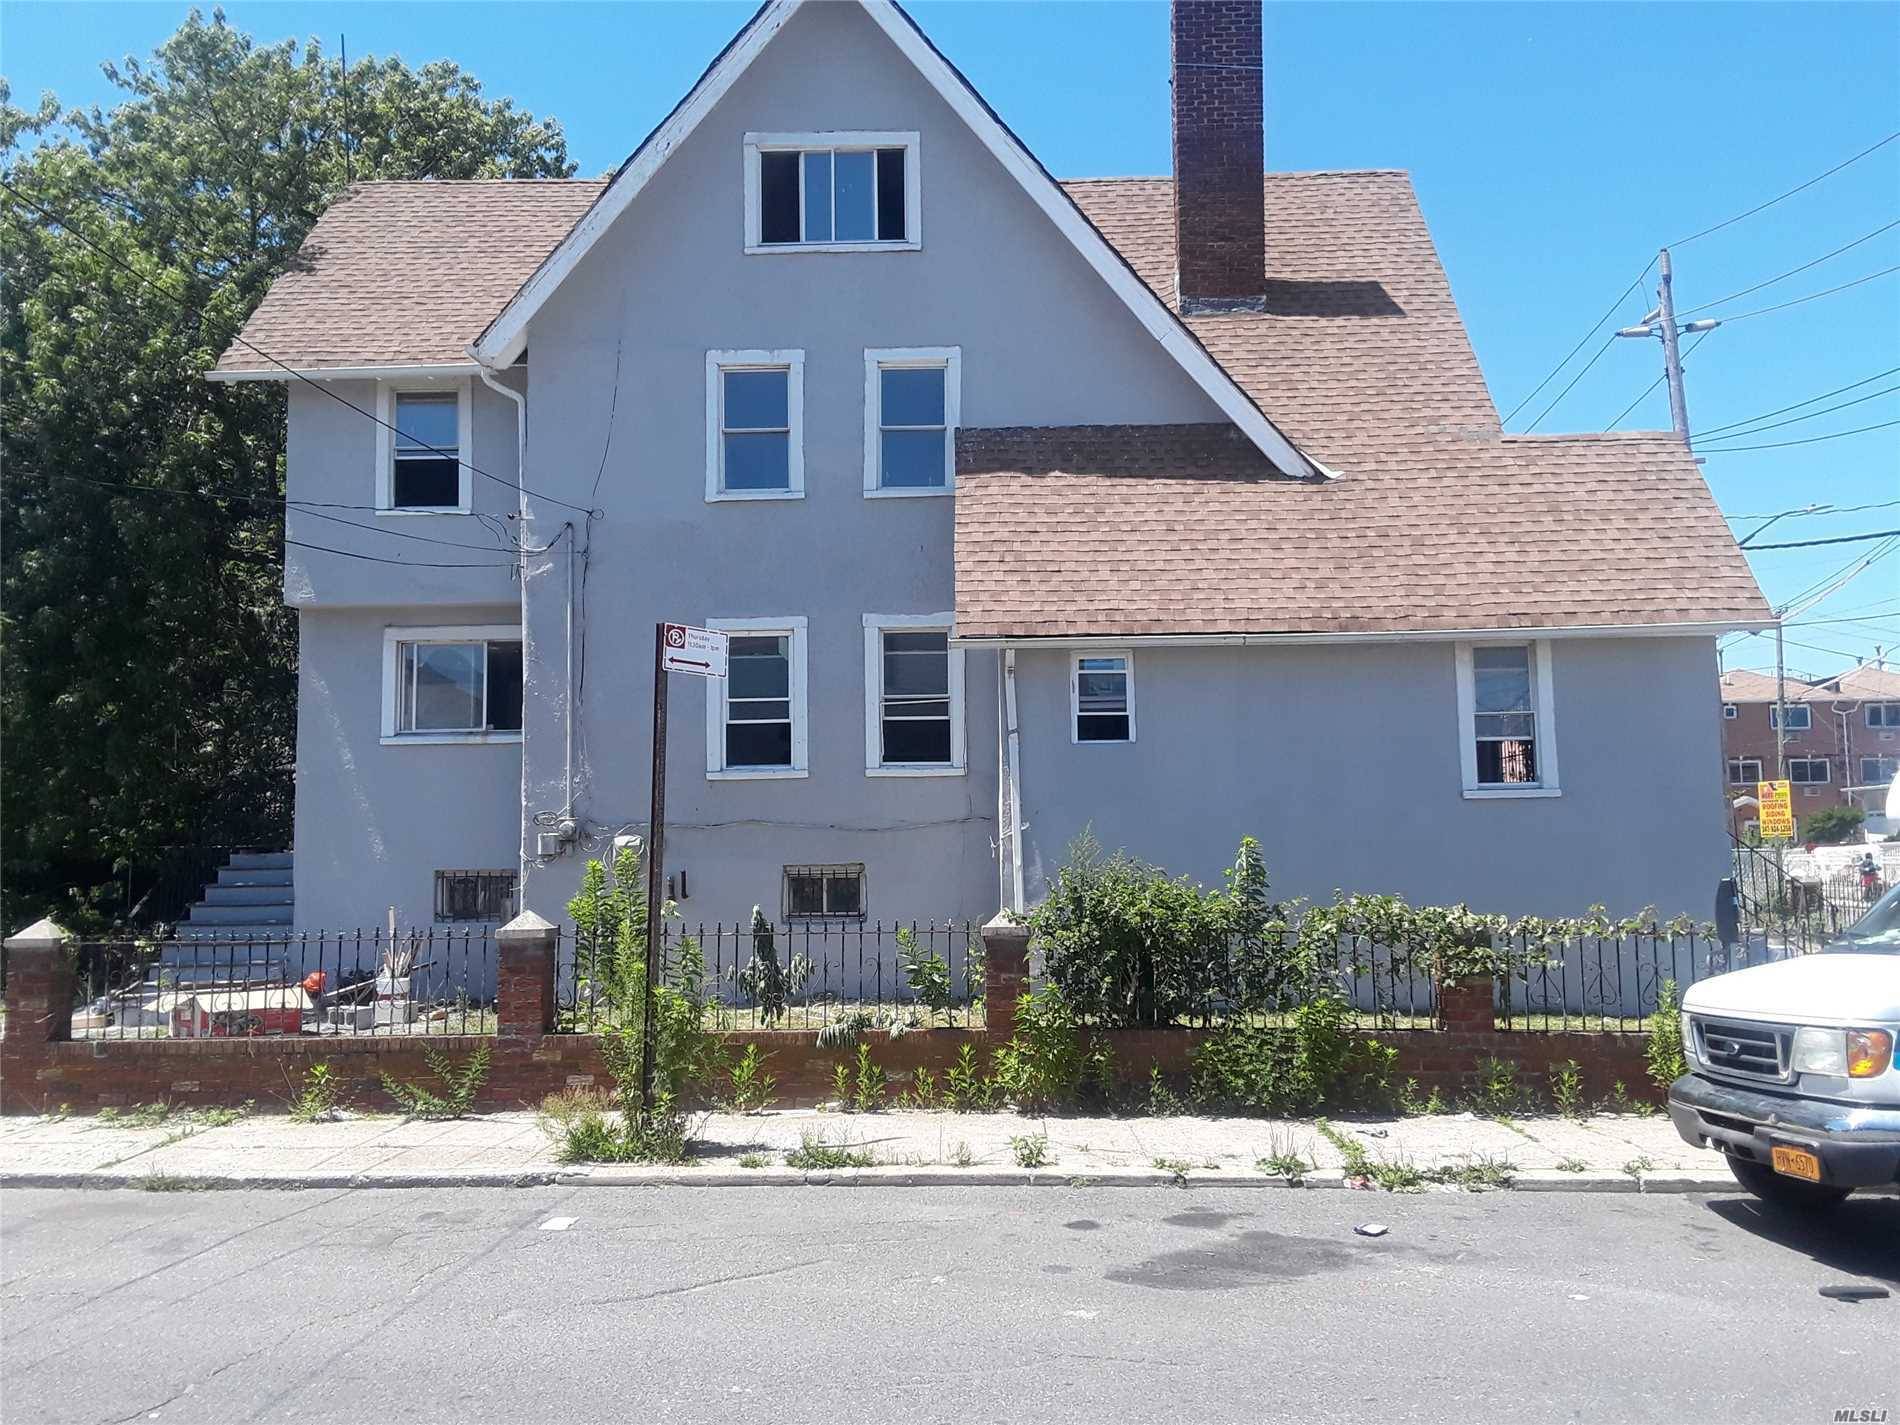 This Single Family Home Is Newly Renovated, Finished Attic With Two Bedrooms In The Attic, Nice Big Yard.